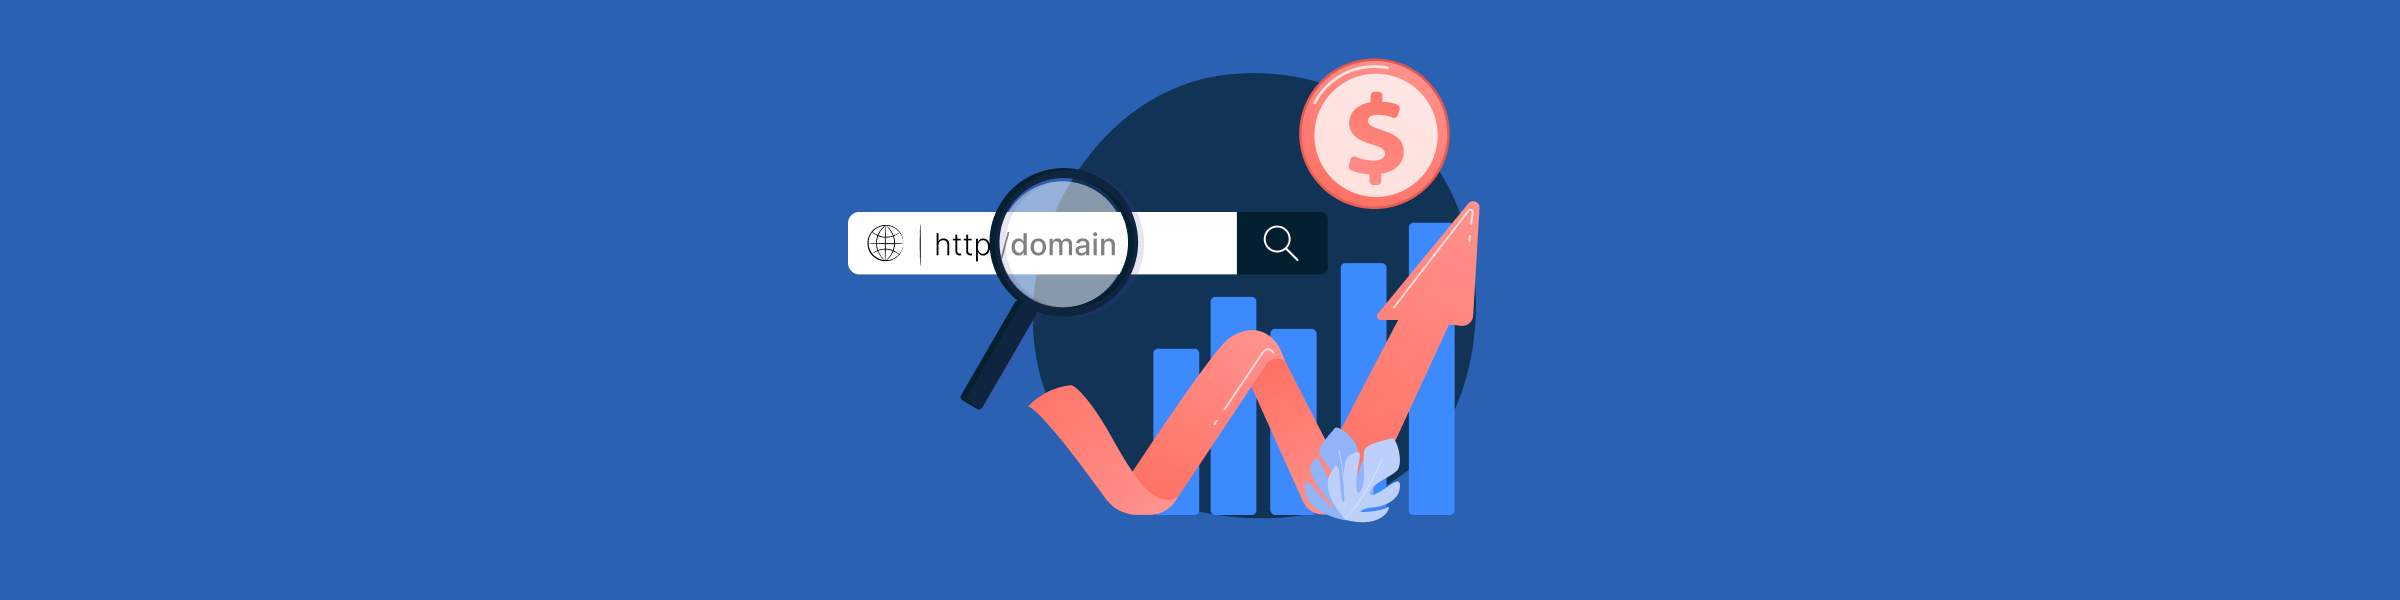 domain investing - how to become a domain investor?